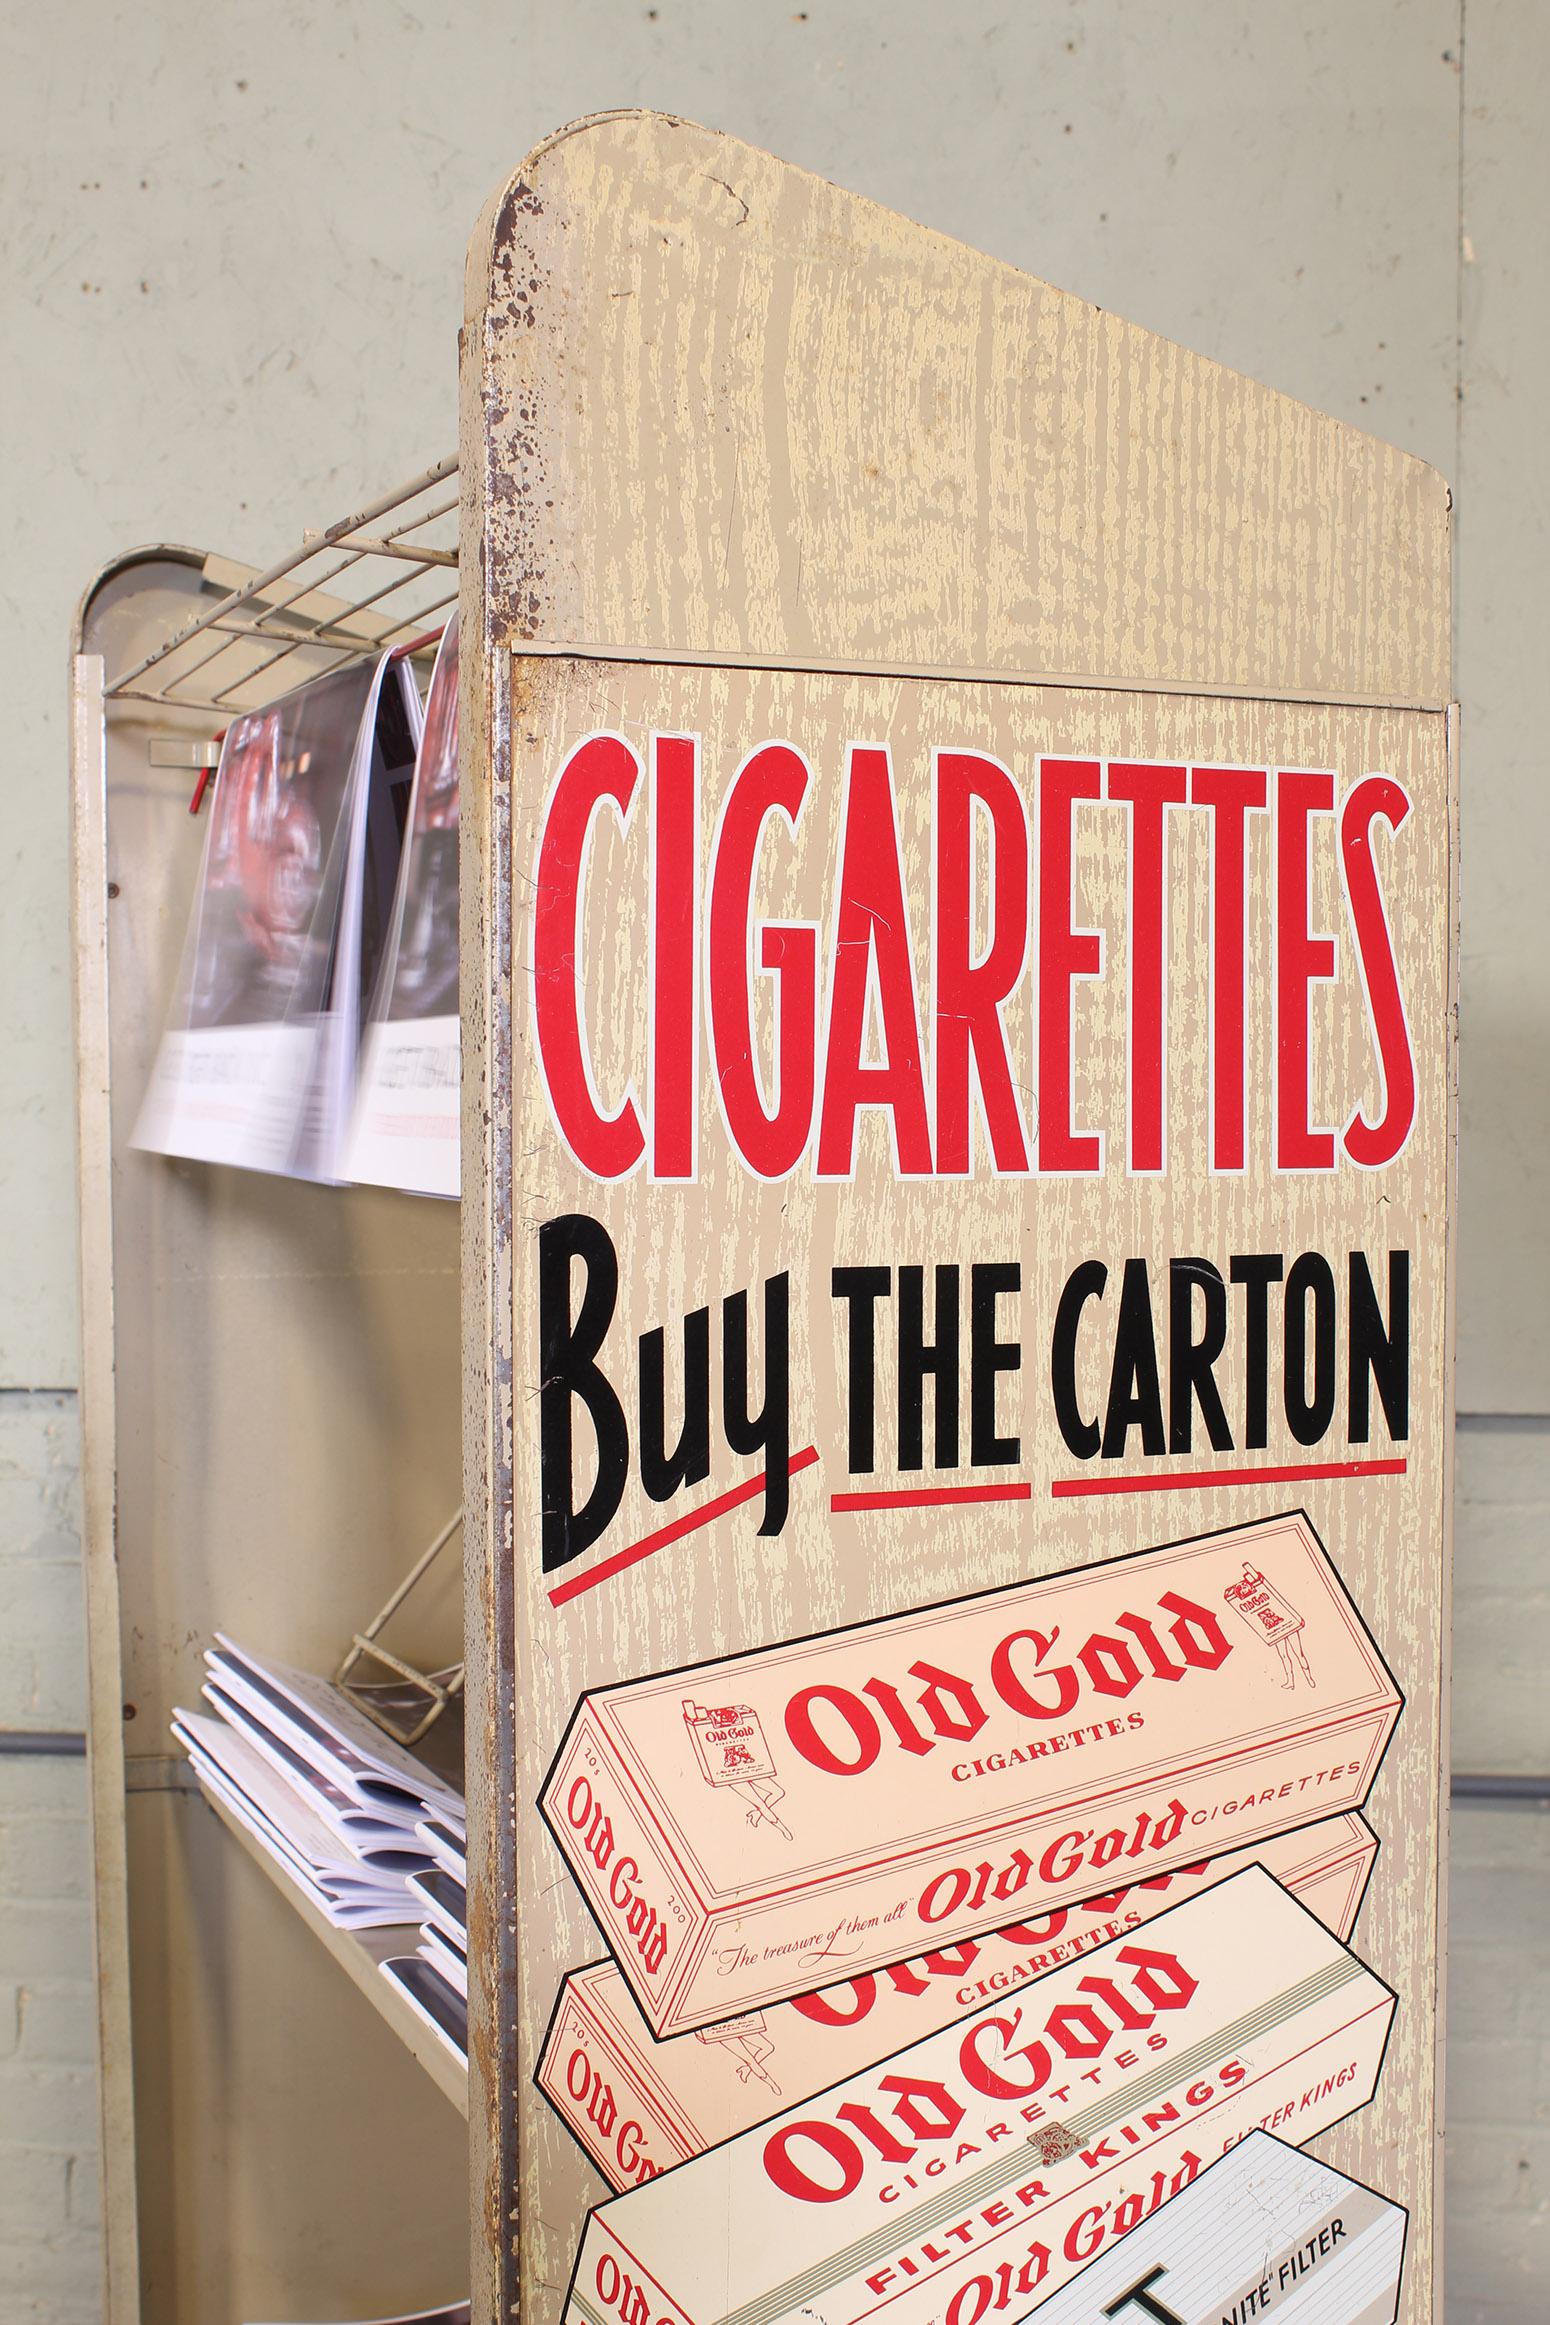 American Vintage Magazine Rolling Rack Newspaper Stand with Tobacco Advertisement